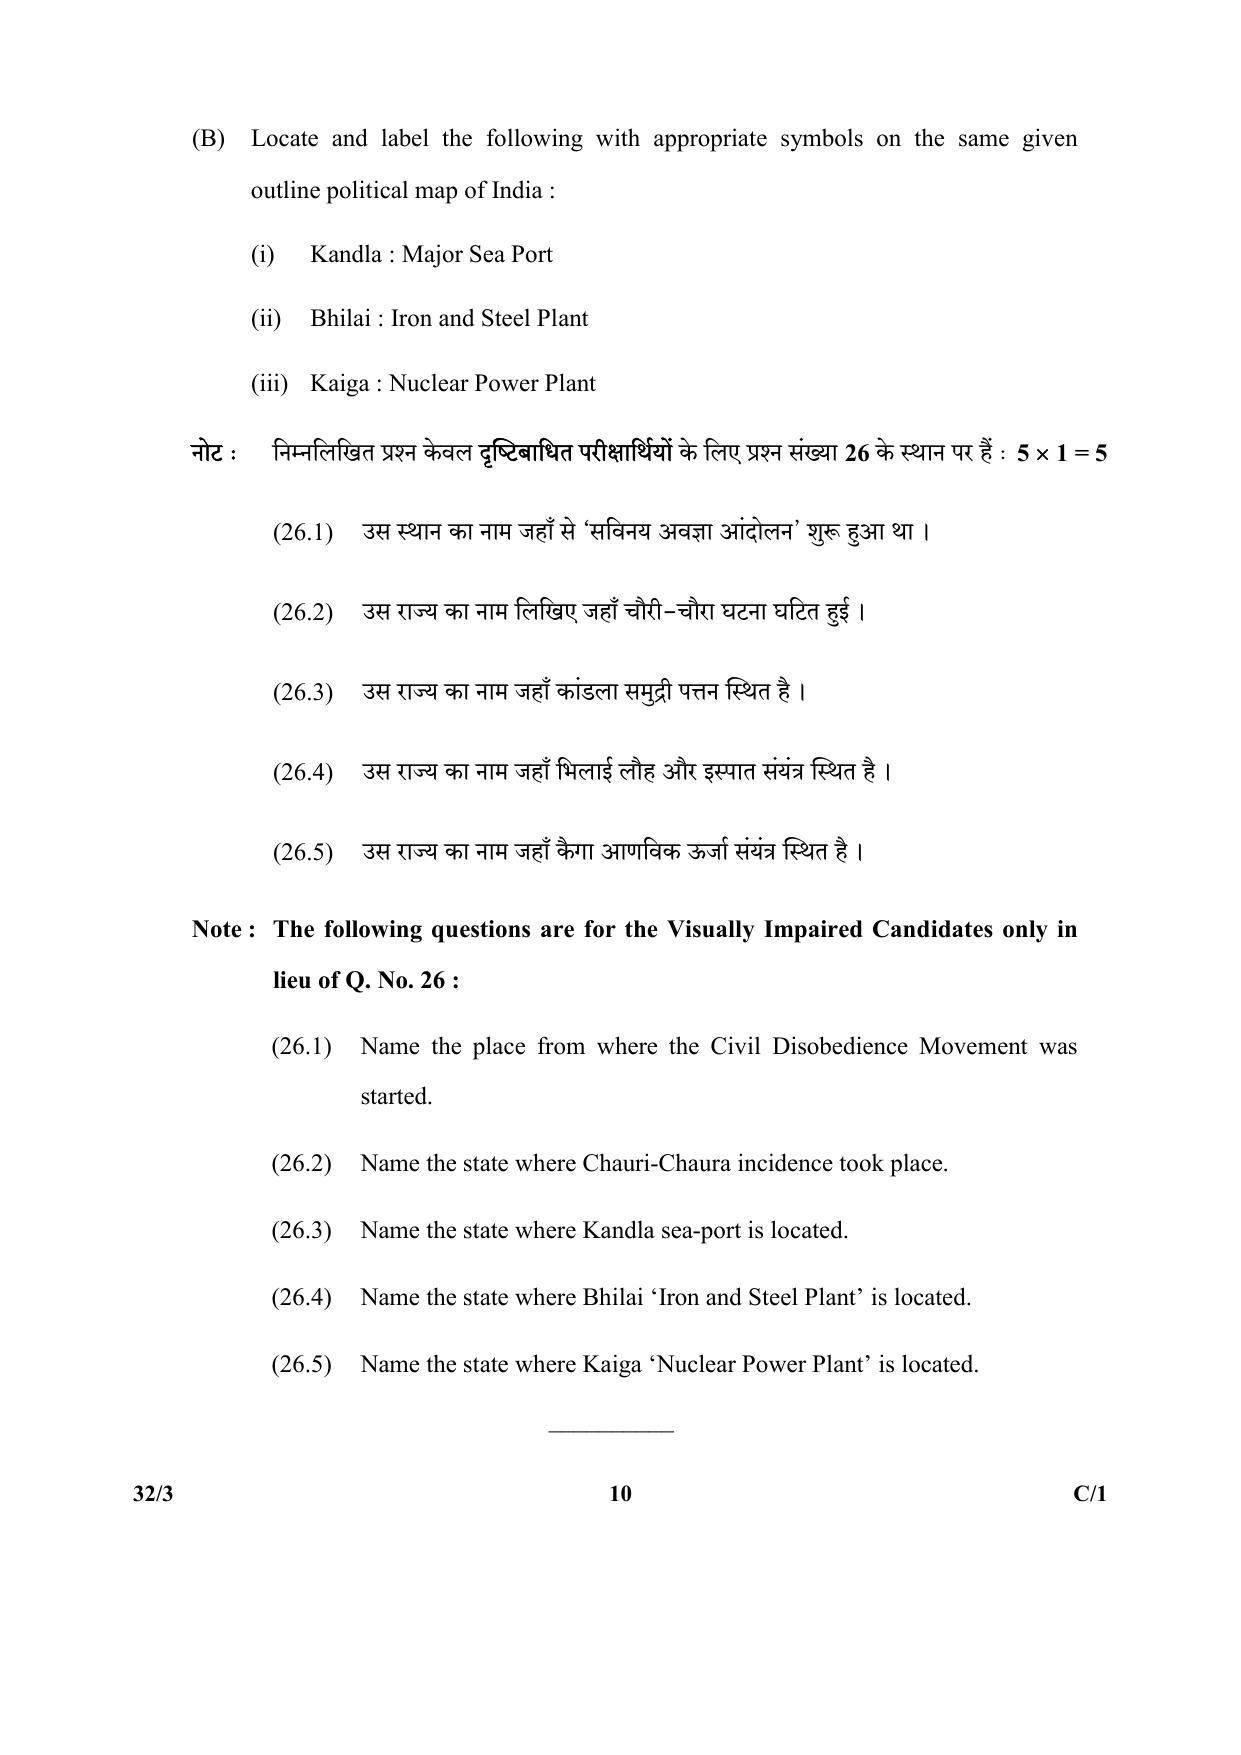 CBSE Class 10 32-3_Social Science 2018 Compartment Question Paper - Page 10